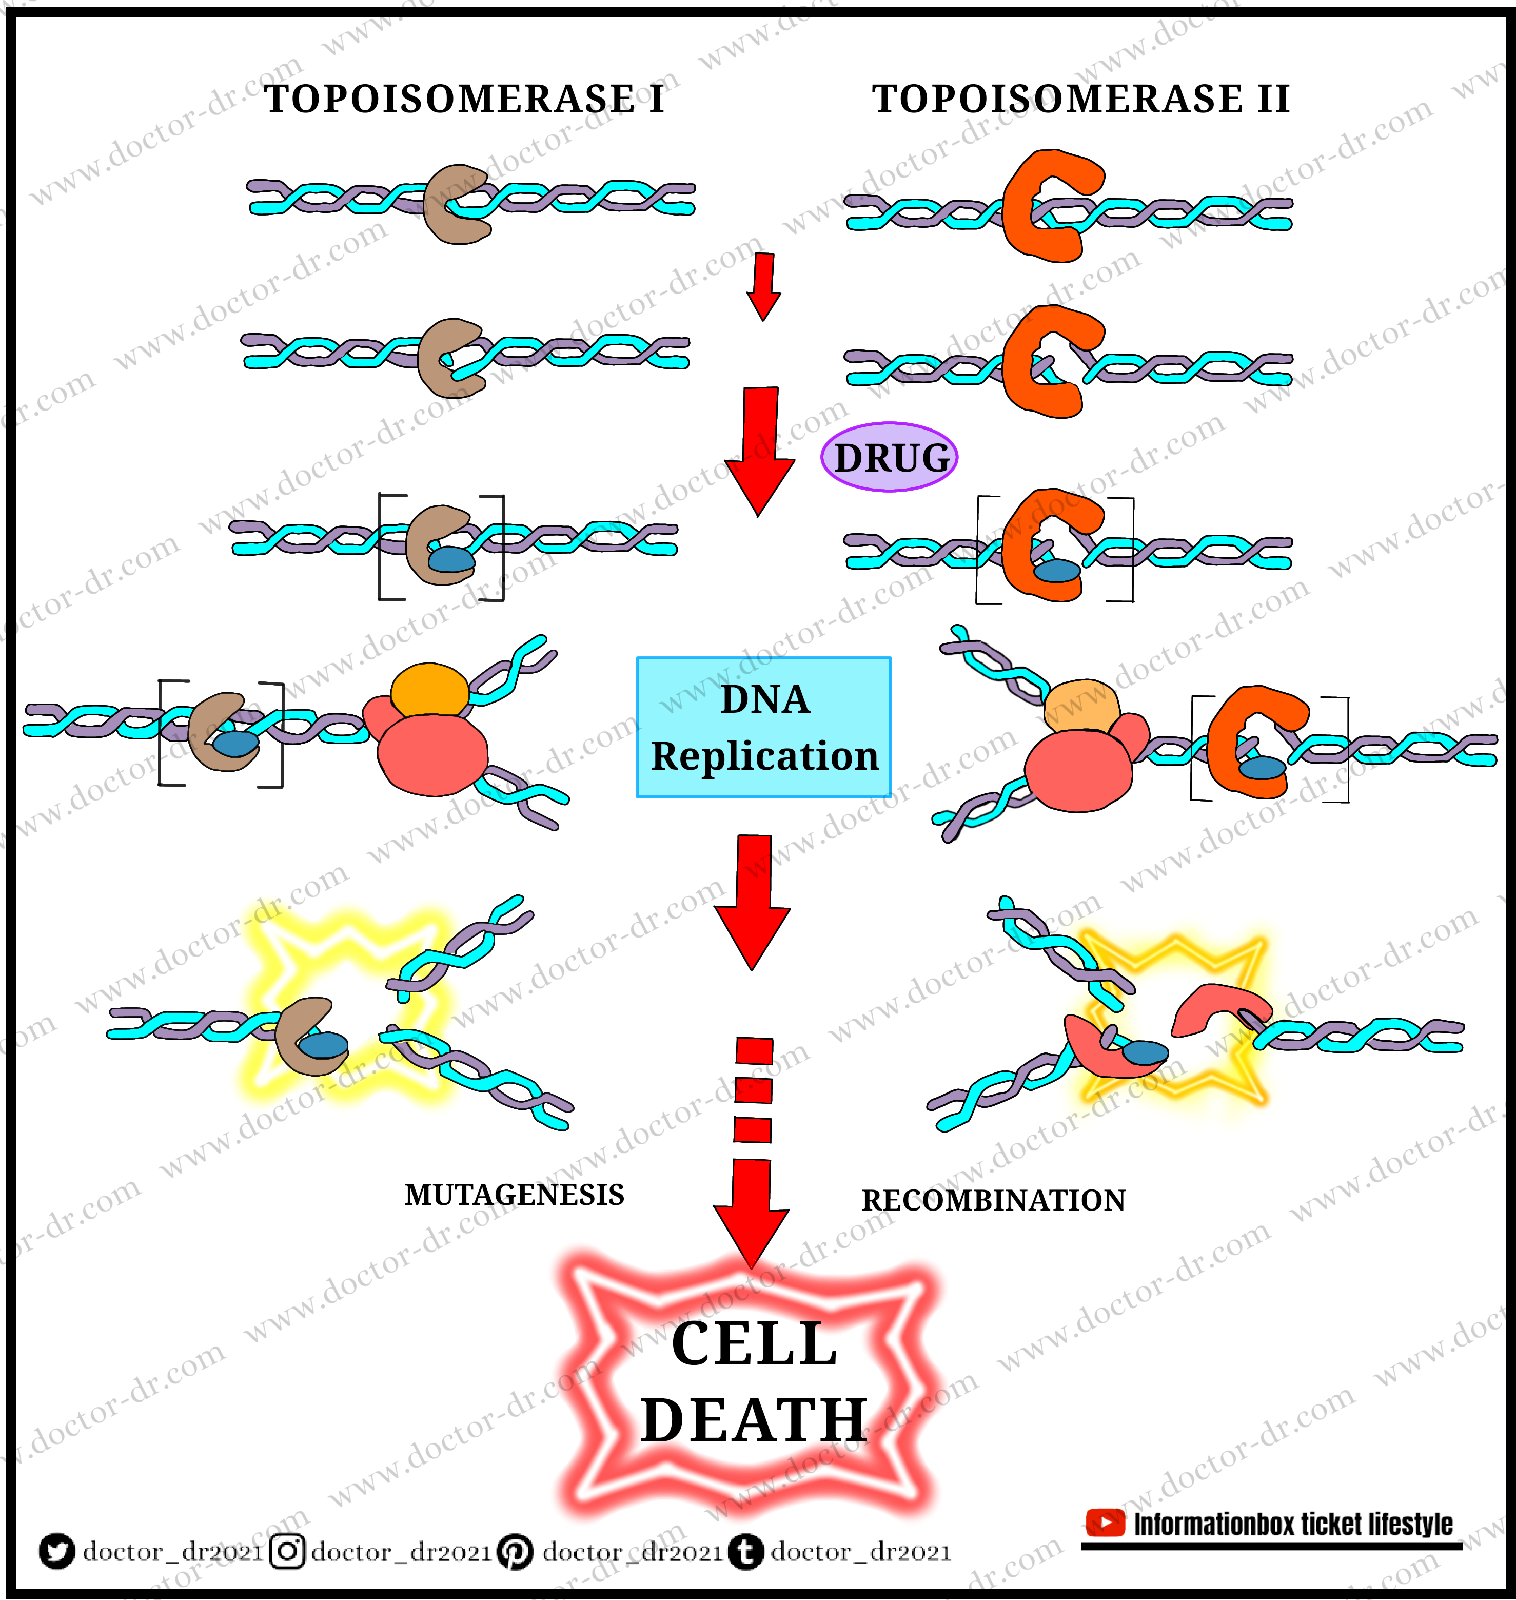 All About Topoisomerase by Doctor-dr